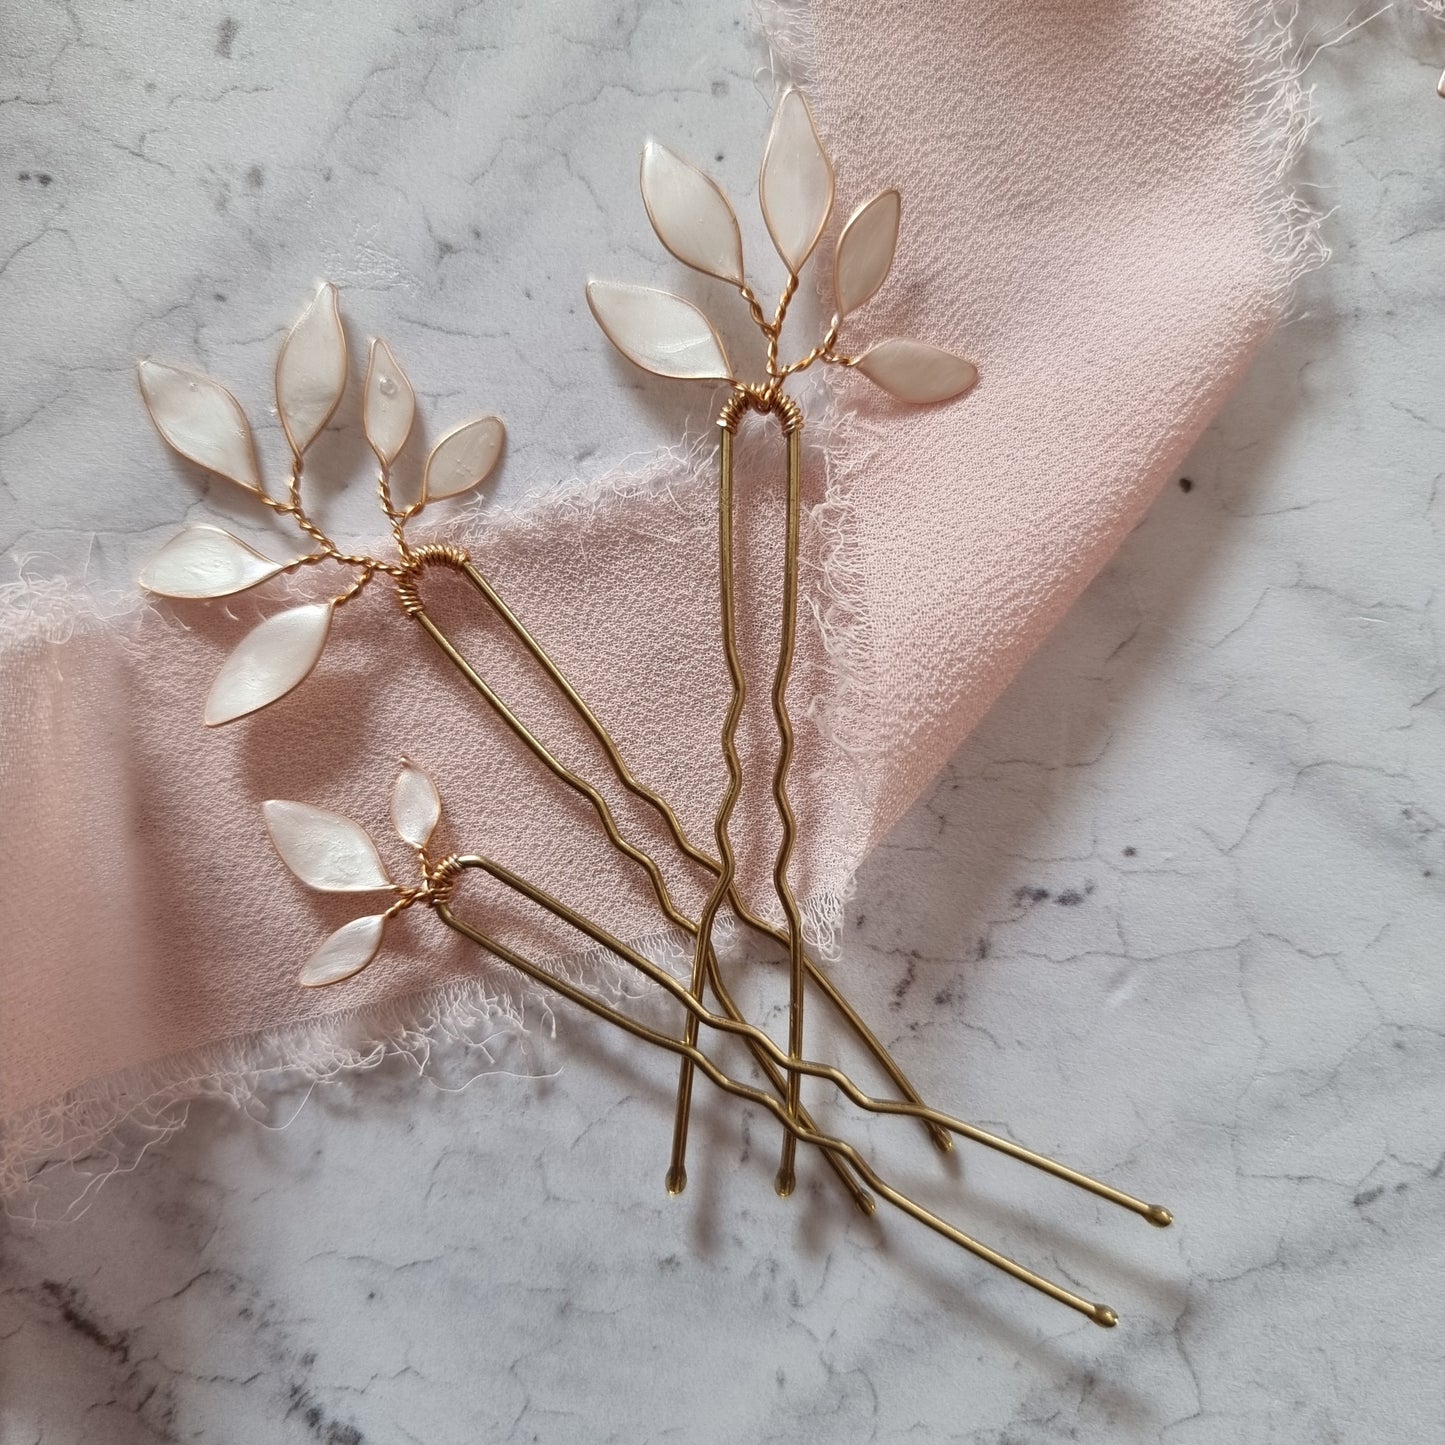 Enchanted Glass Hairpins Set of 3 in Gold